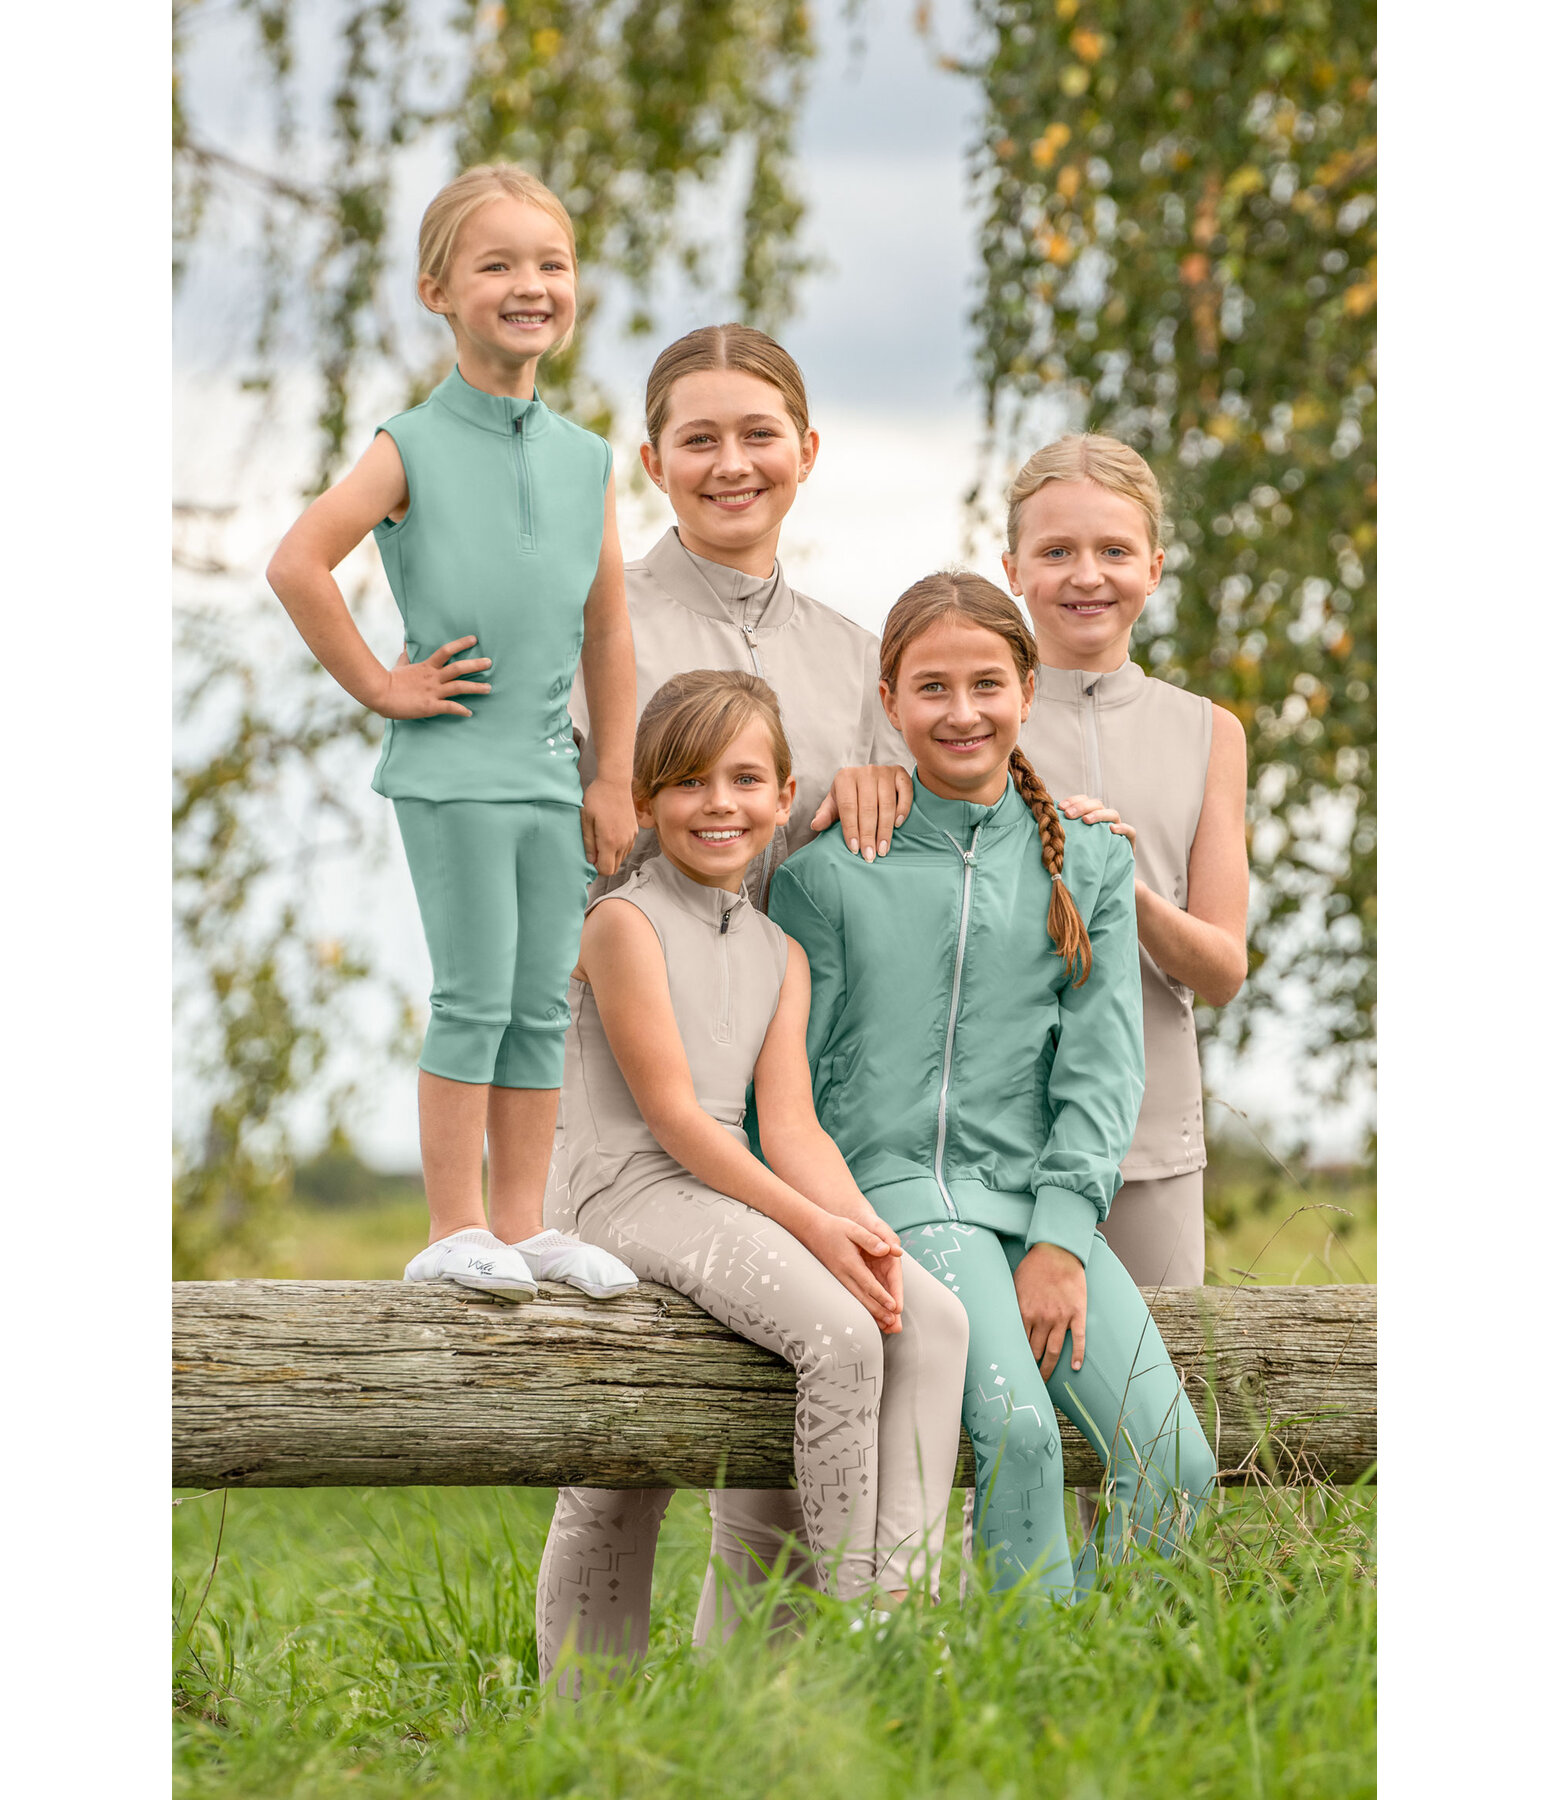 Vaulting Leggings Mary for Children and Teens